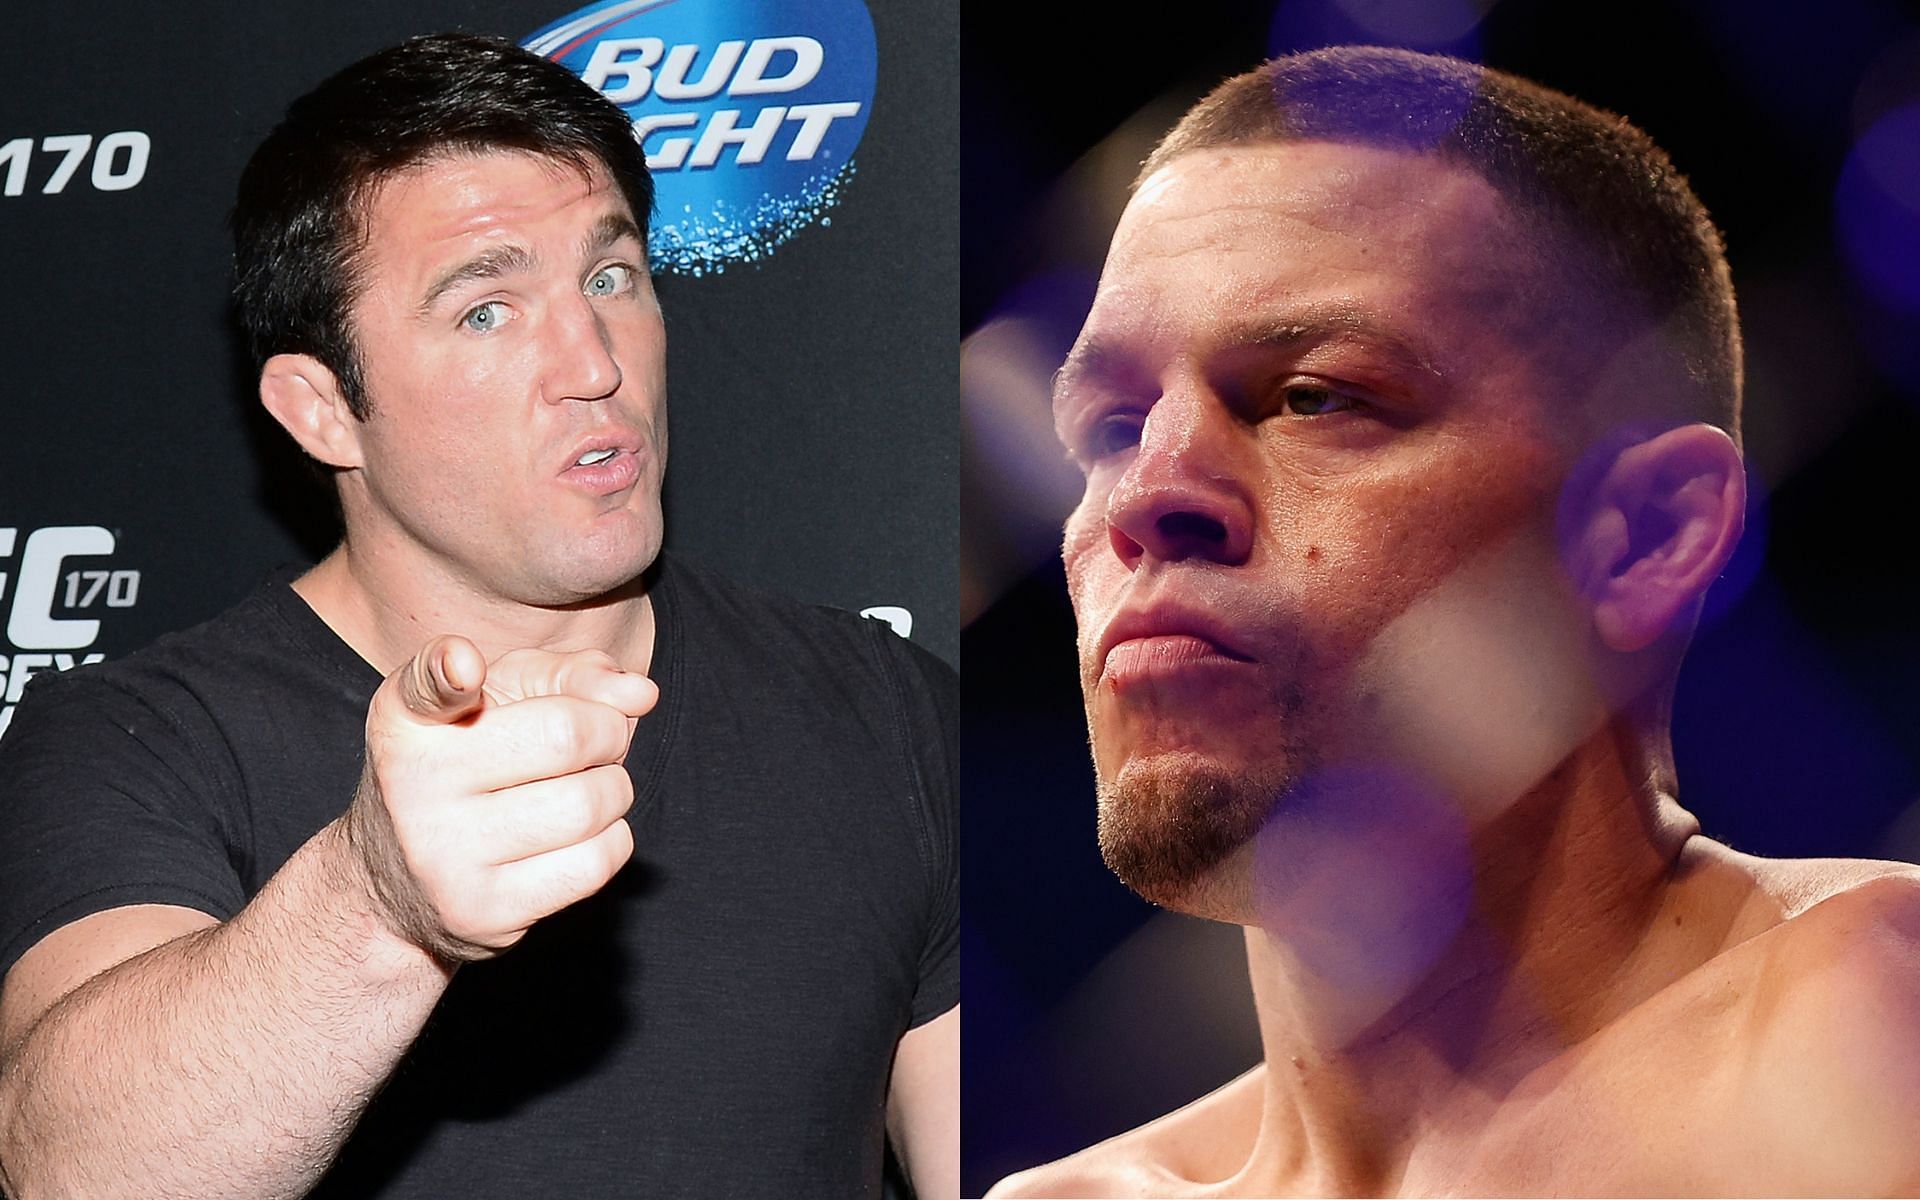 Chael Sonnen (L) is unsure what Nate Diaz (R) has in store